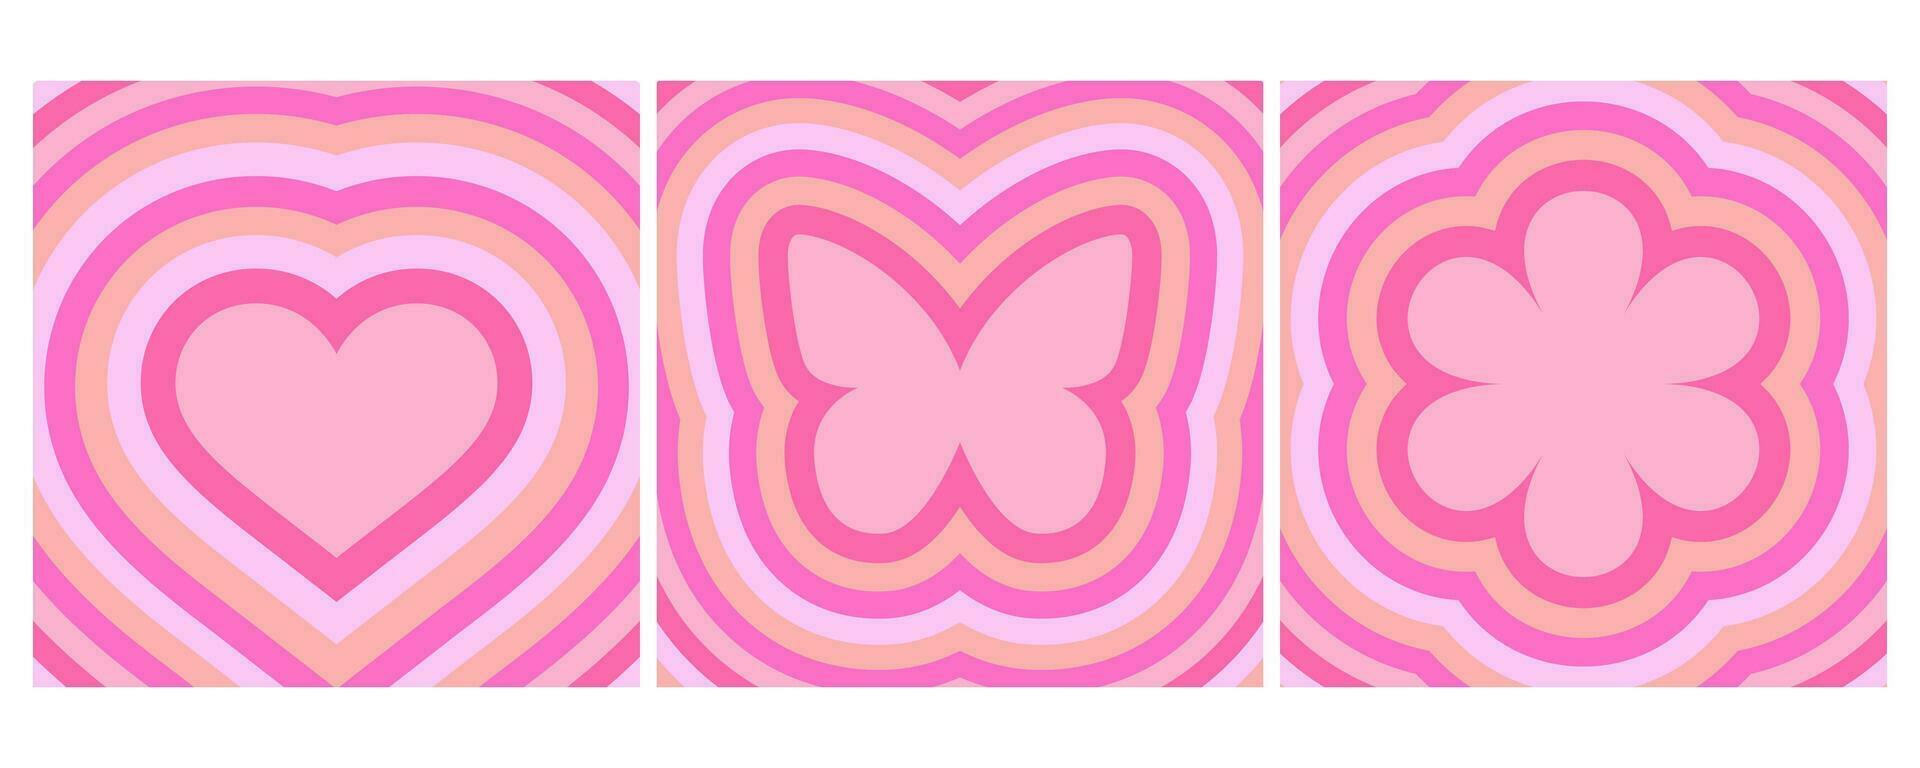 Groovy backgrounds with heart flower and butterfly. Retro psychedelic pink tunnel illustration. 60s 70s cartoon design for poster. Y2K romantic wallpaper. Vector art